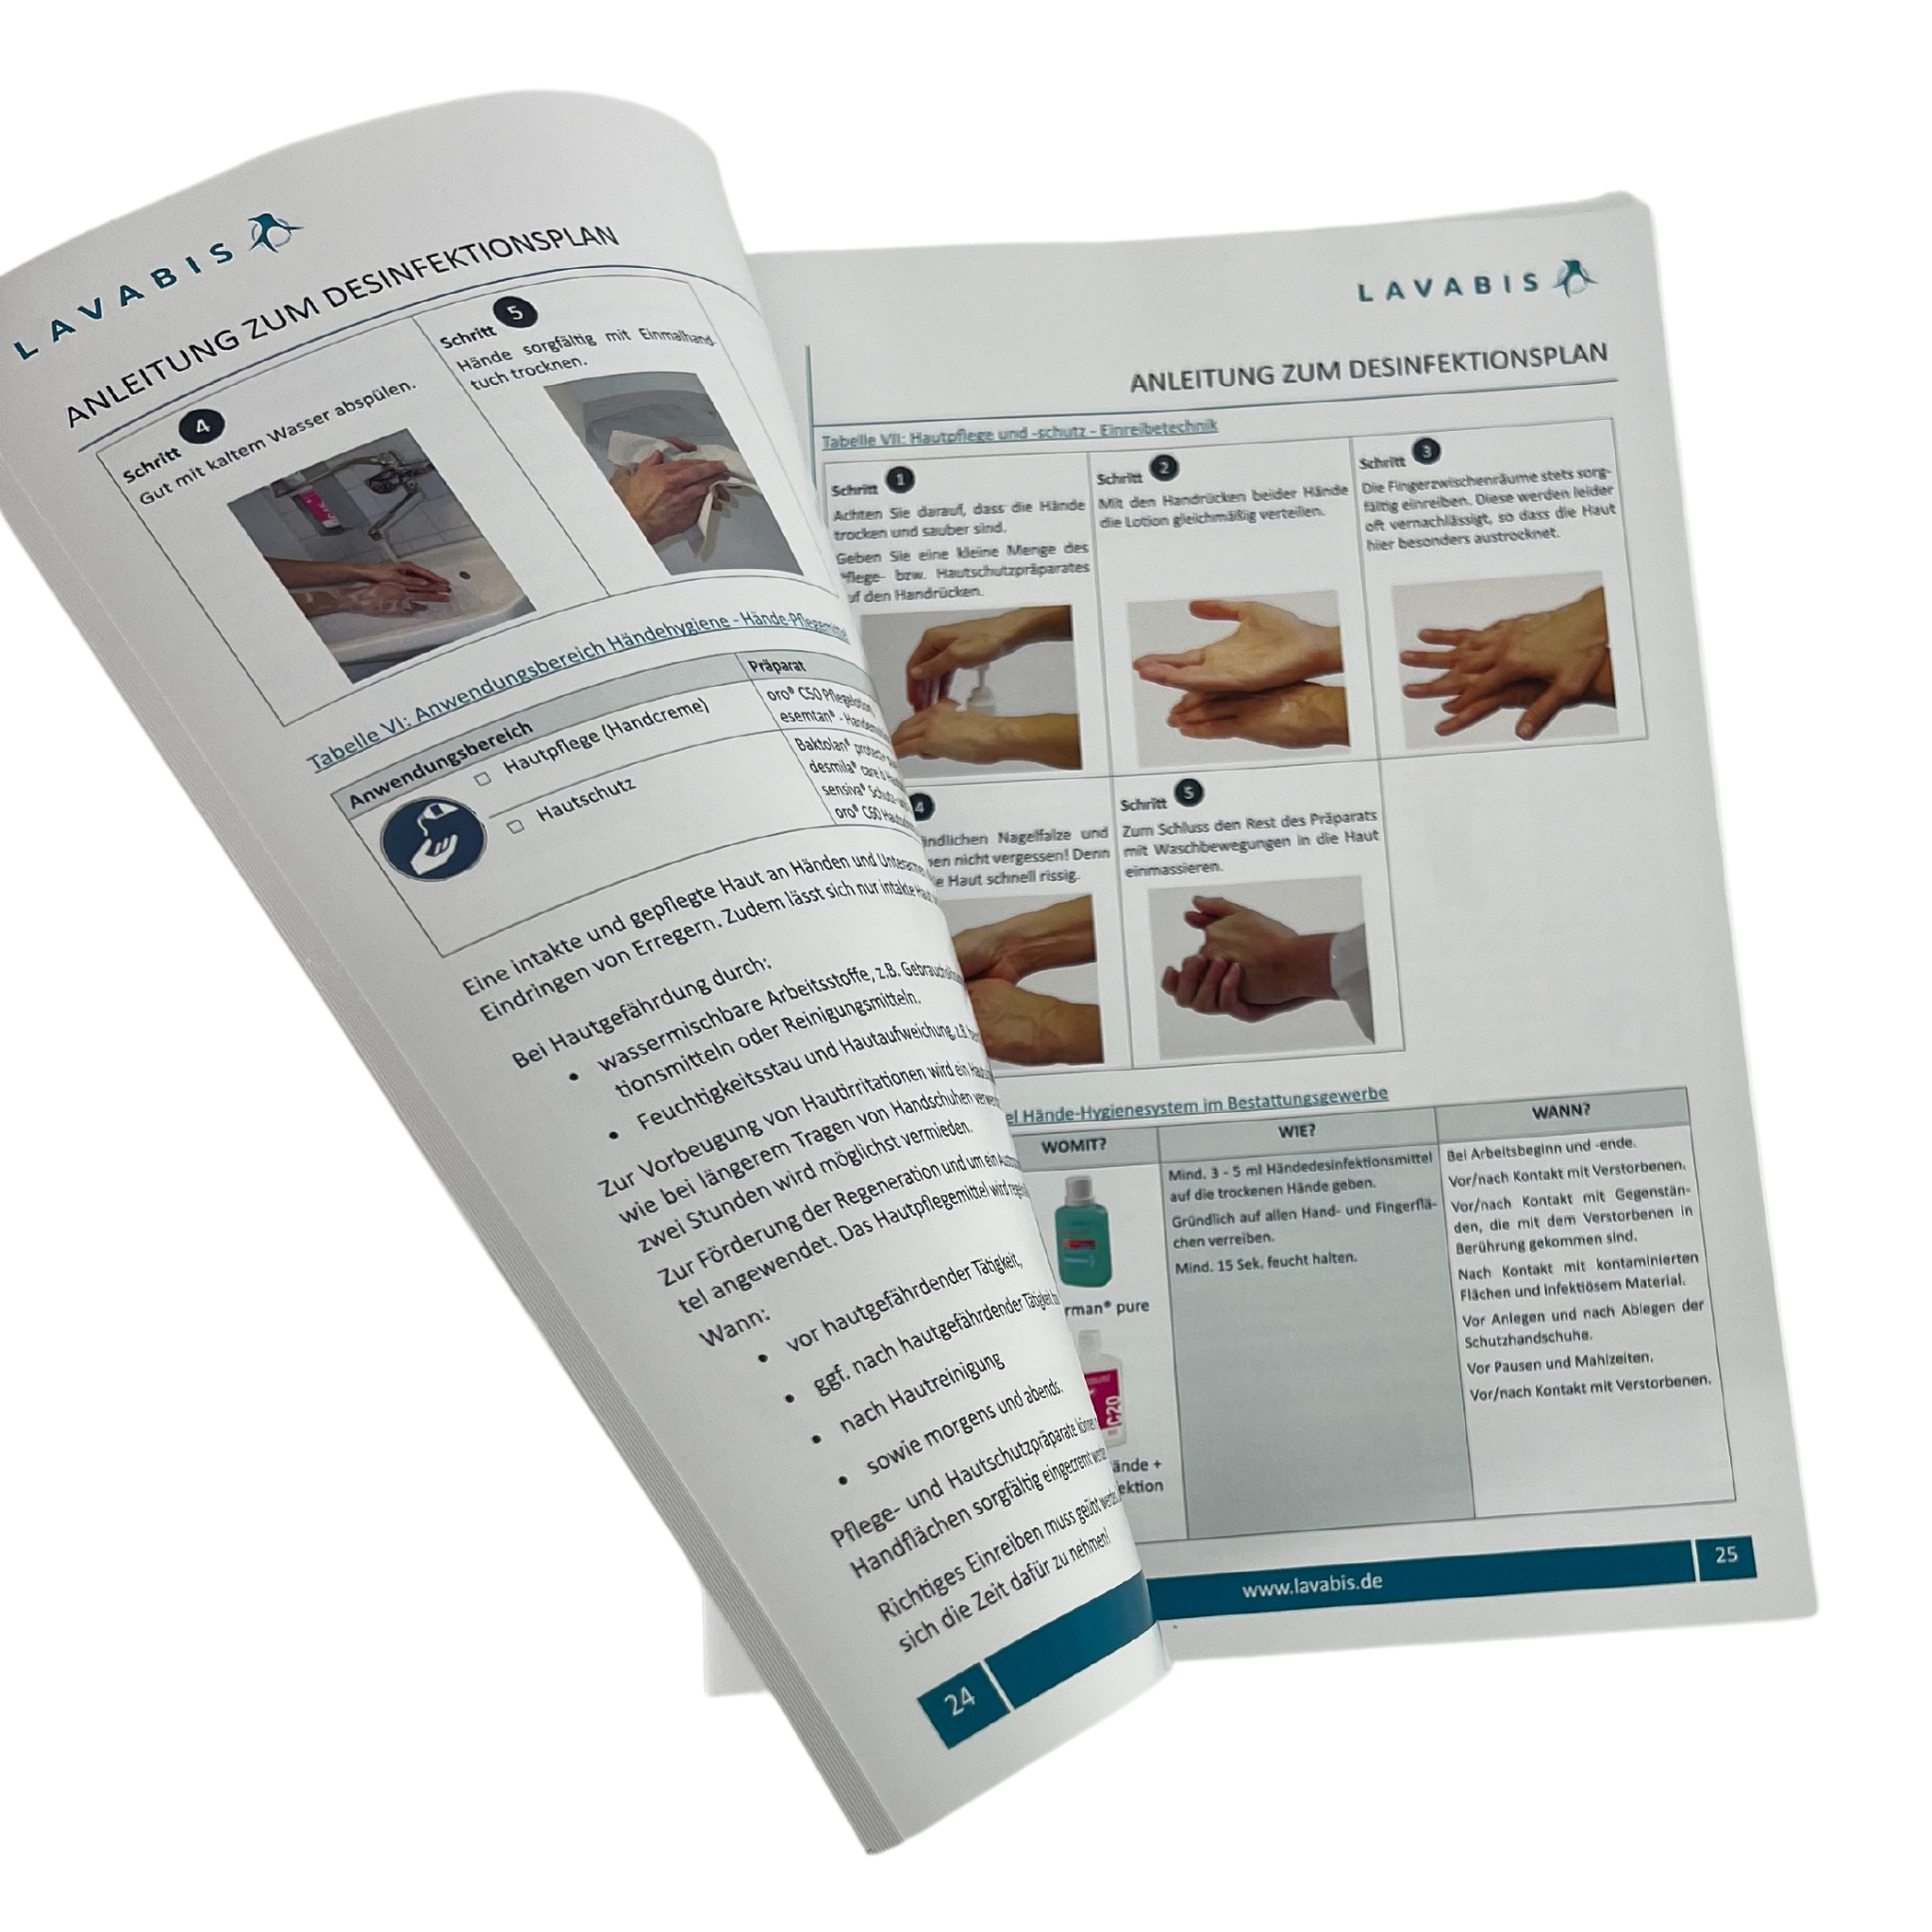 Disinfection plan for morticians - Optimum laminated